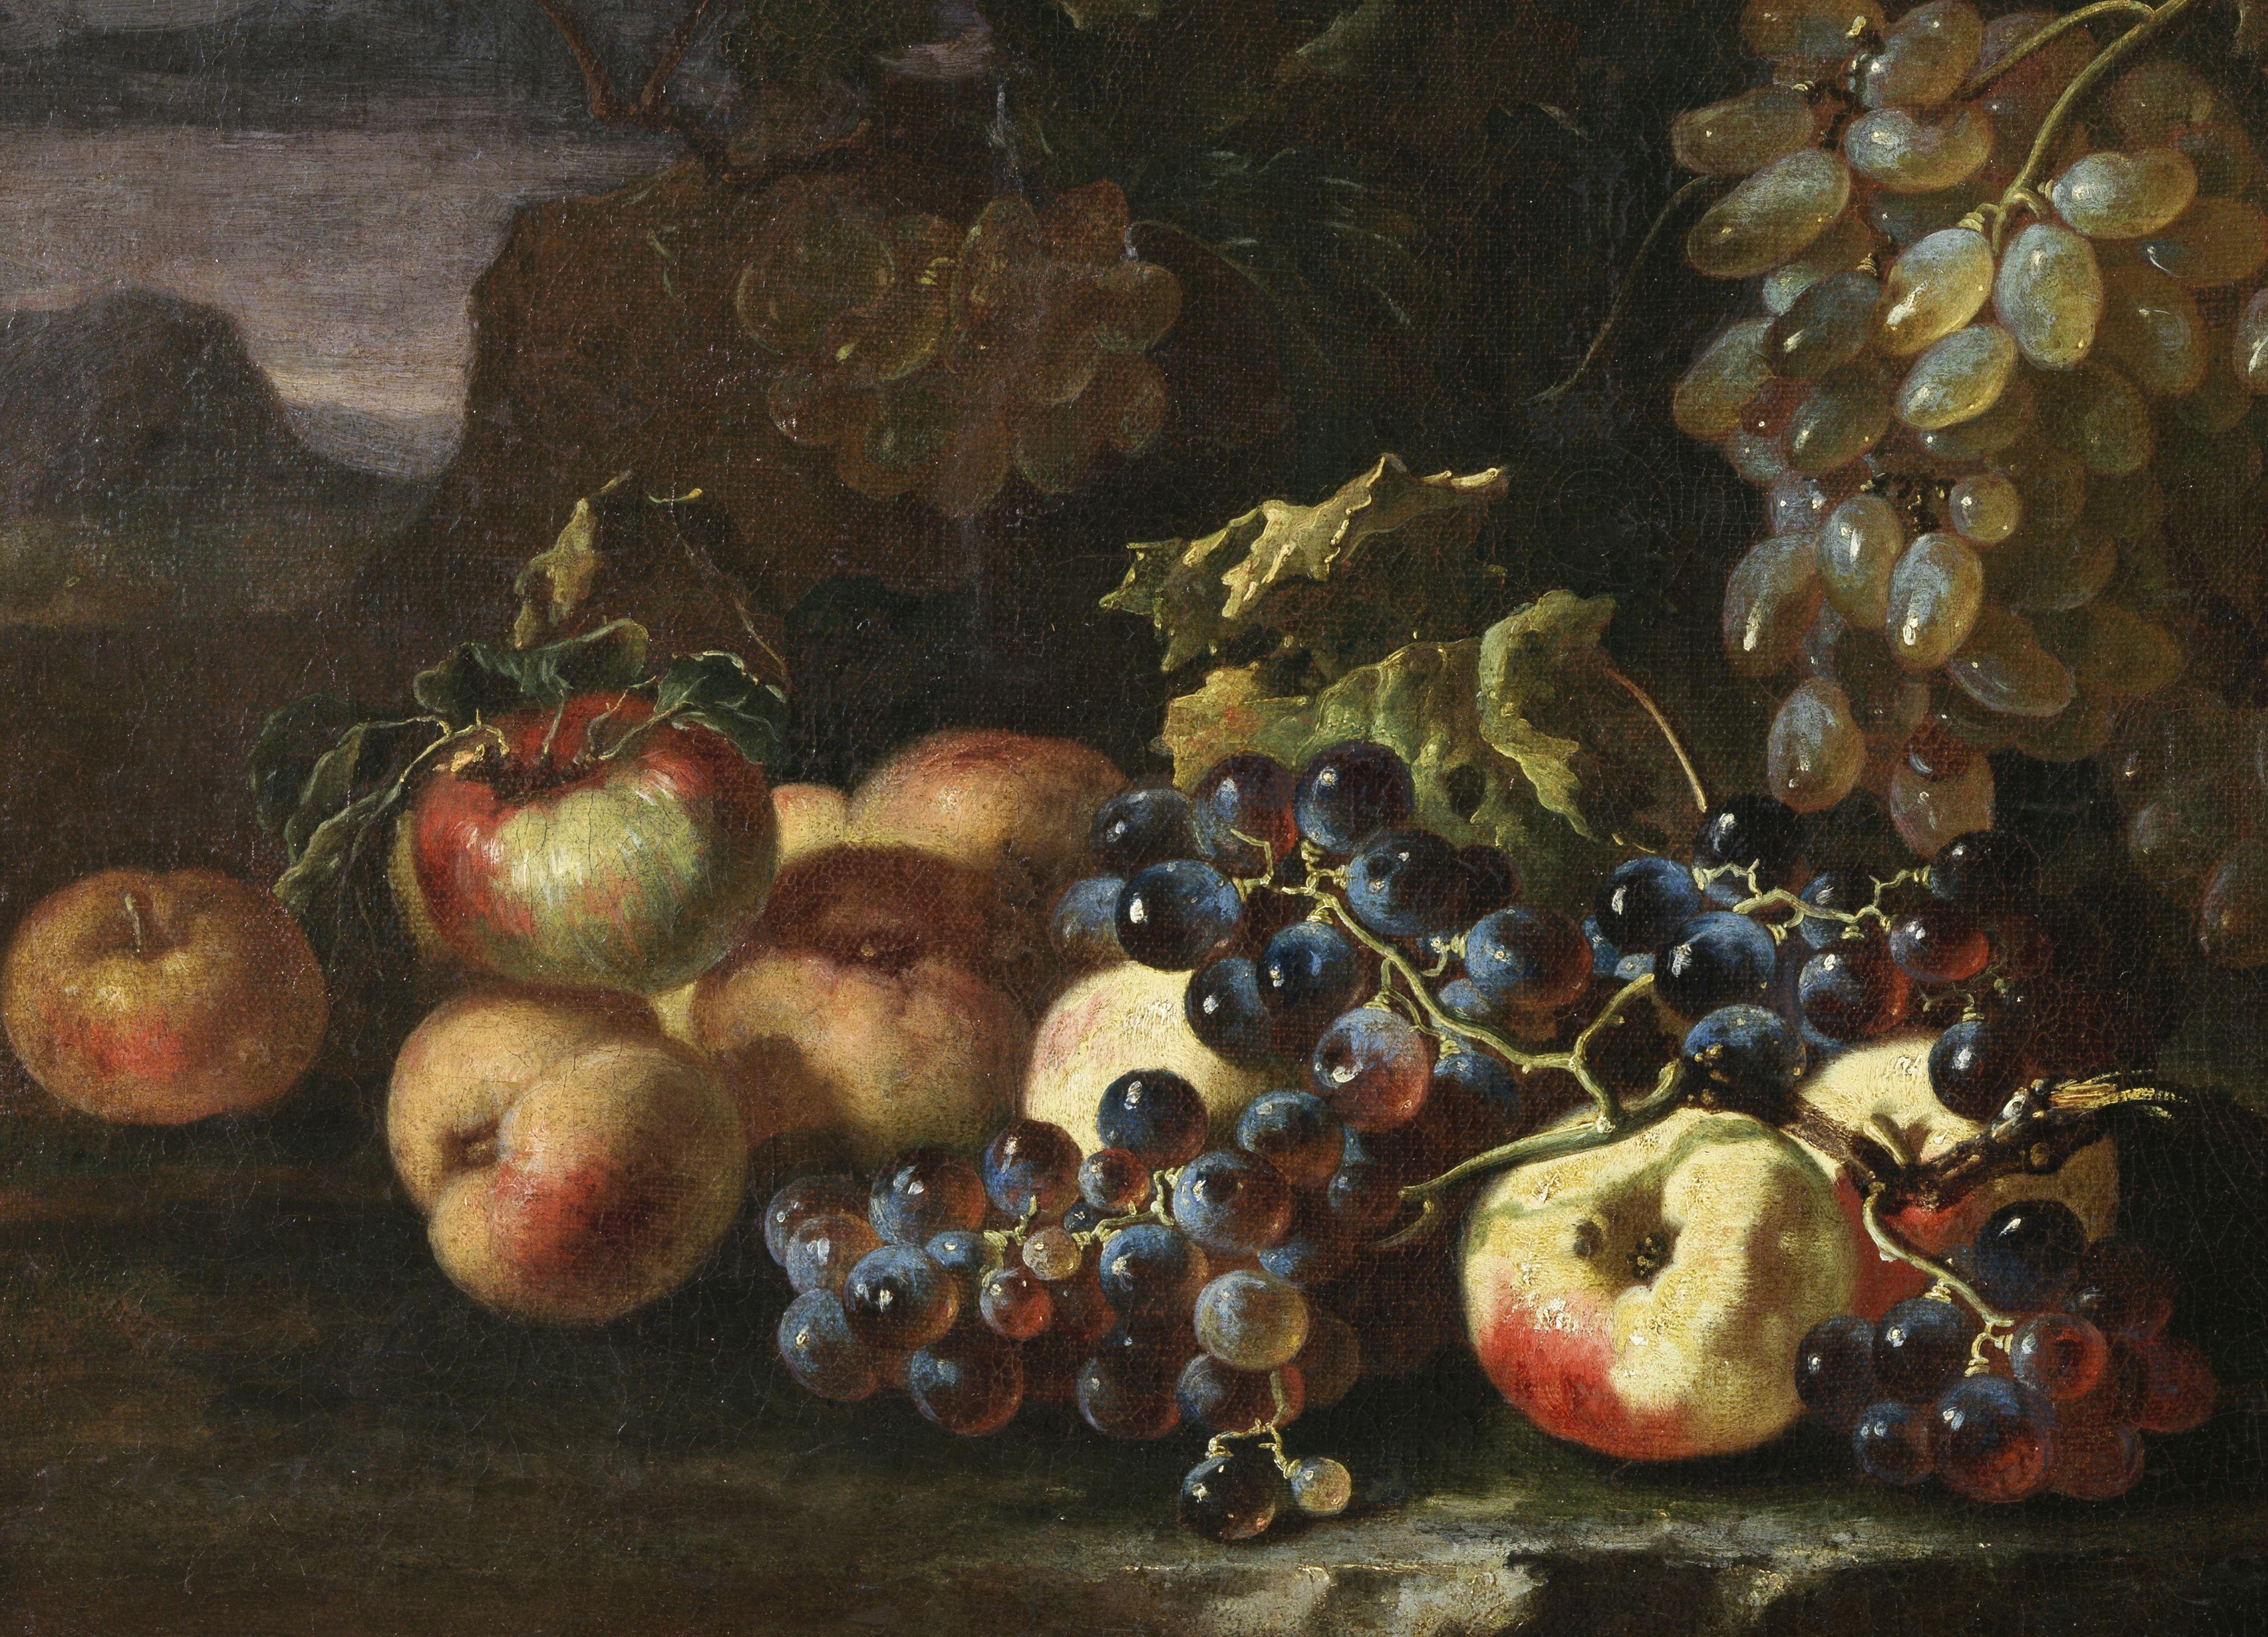 Oil painting on canvas measuring 50 x 99 cm without frame and 62 x 111 cm with coeval frame, depicting a still life of fruit by the painter Giovanni Paolo Castelli known as Spadino ( Rome 1659 - 1730 ).

This magnificent canvas, hitherto unpublished